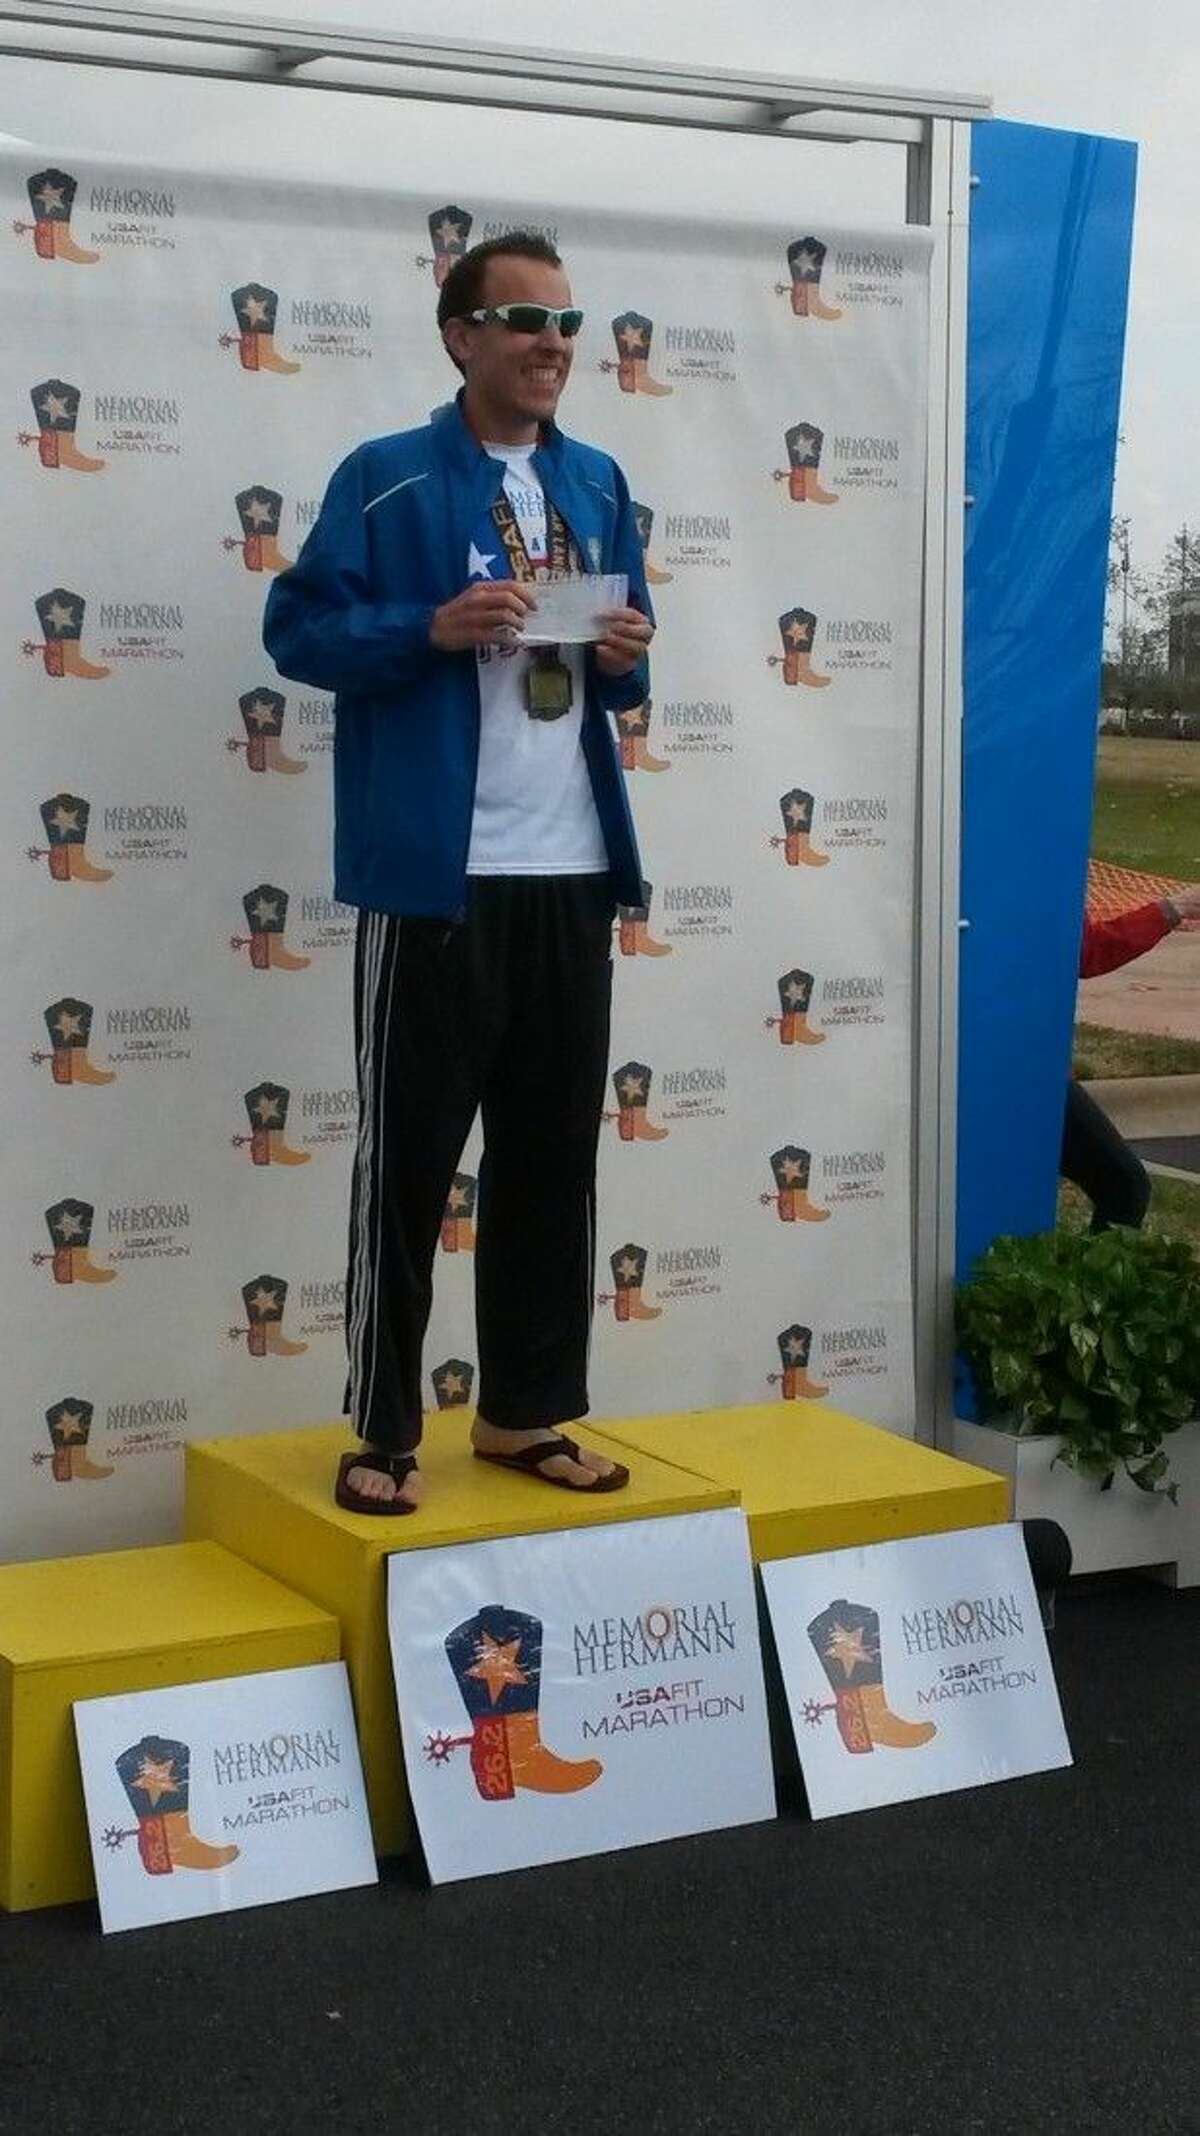 Houston's Andrew Erwin won the male overall championship at the Memorial Hermann USA Fit Marathon, Jan. 31 in Sugar Land. Erwin clocked a 2:50.44.5 and averaged 6:31 per mile on the 26-mile course.